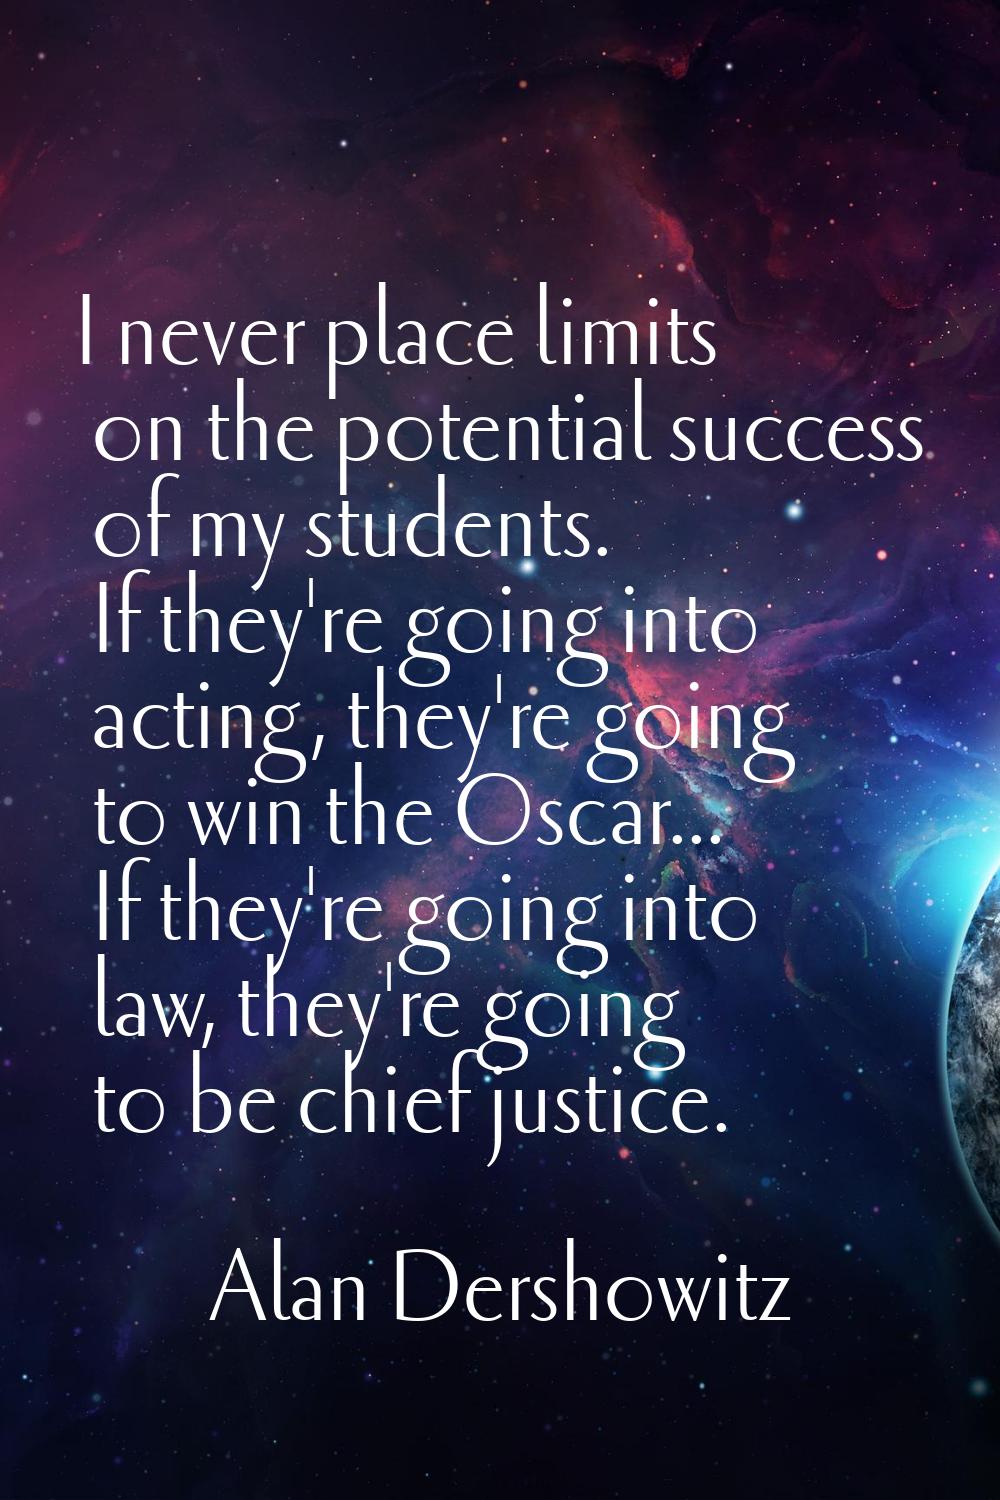 I never place limits on the potential success of my students. If they're going into acting, they're